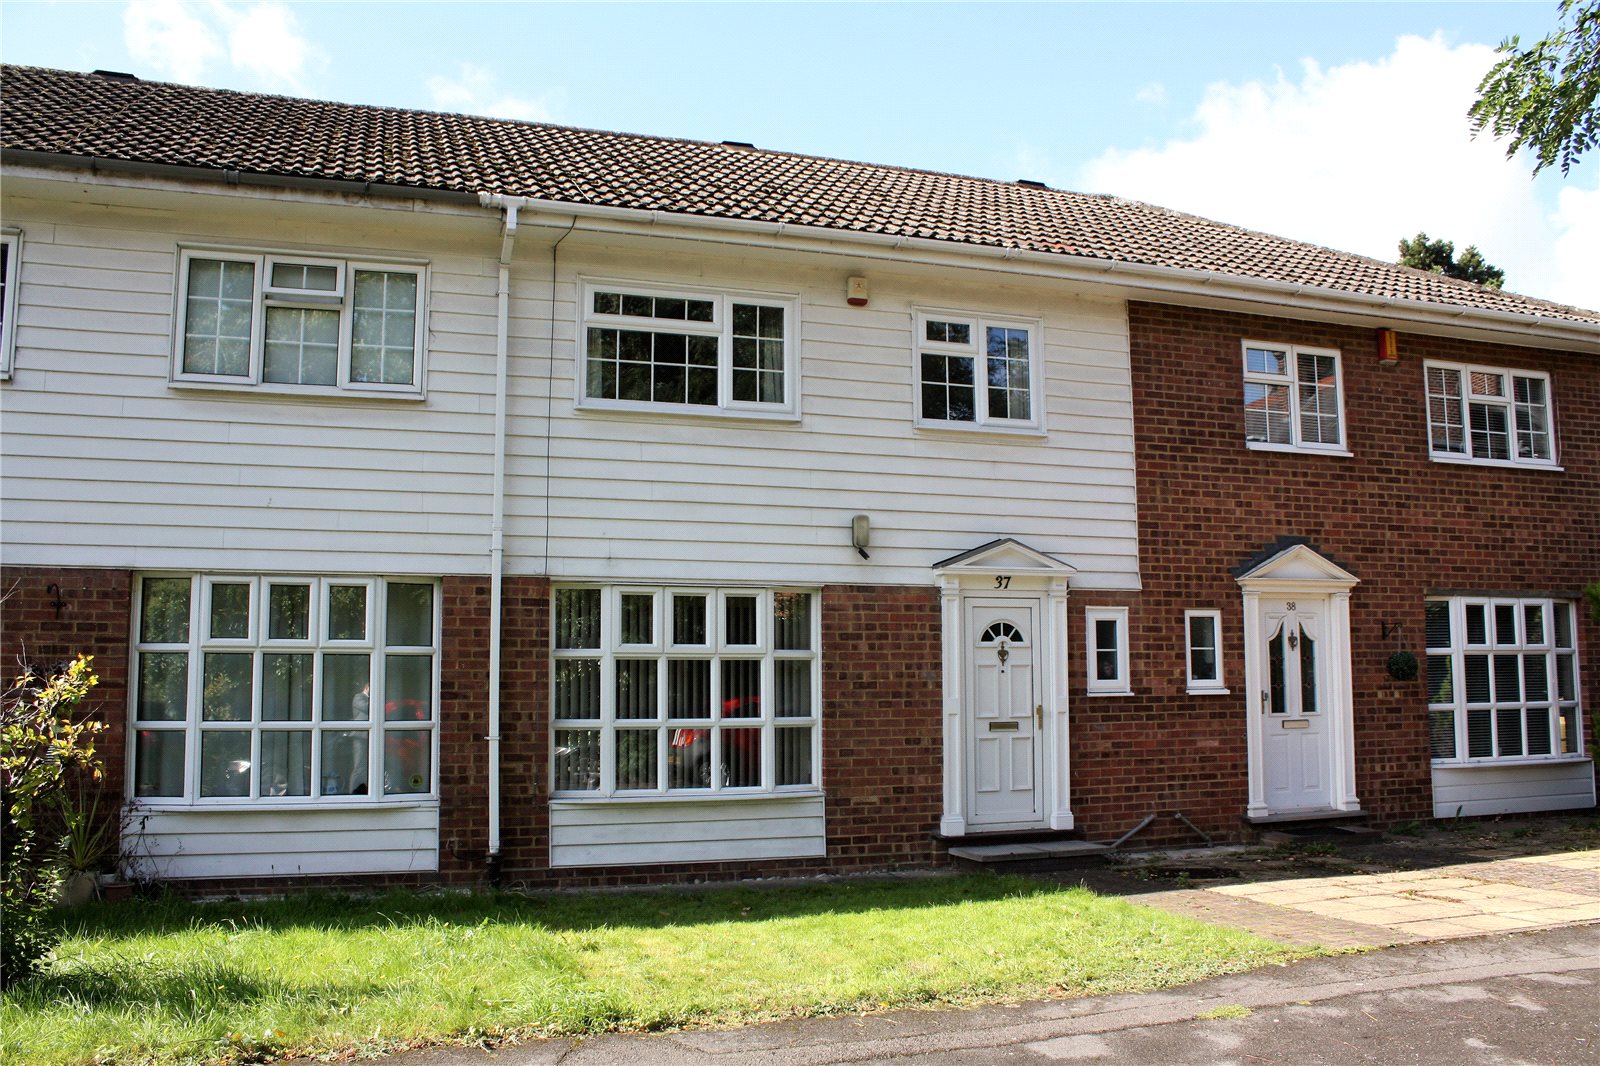 Parkers Reading 3 Bedroom House Let Agreed In Harrow